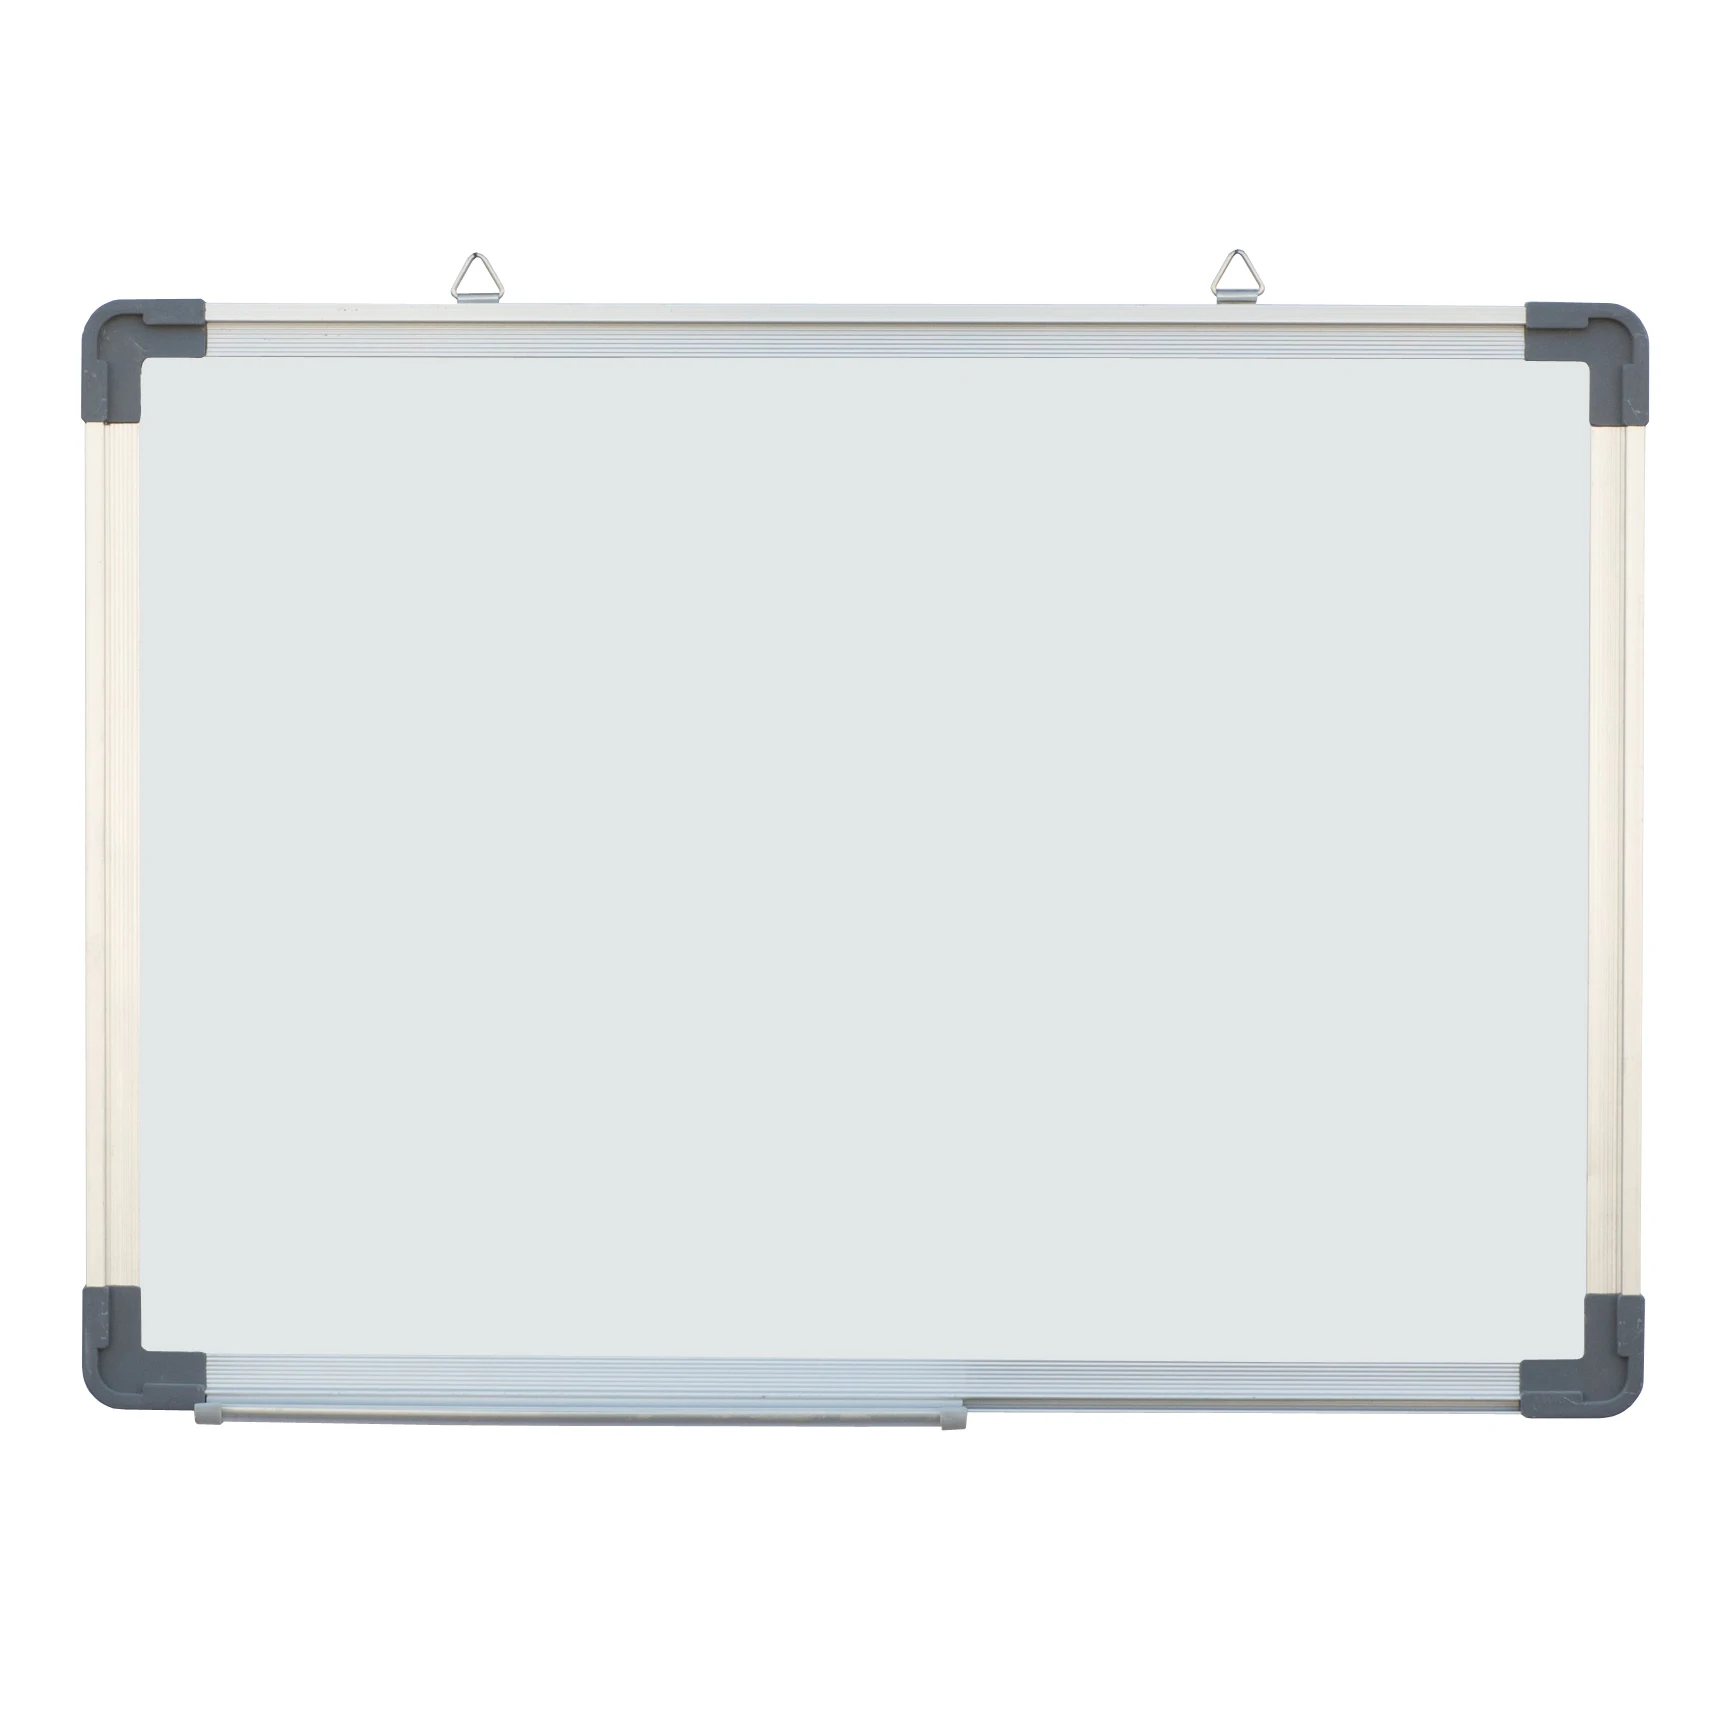 protein Forklaring koks Source wall mounted small writing board magnetic whiteboard on m.alibaba.com